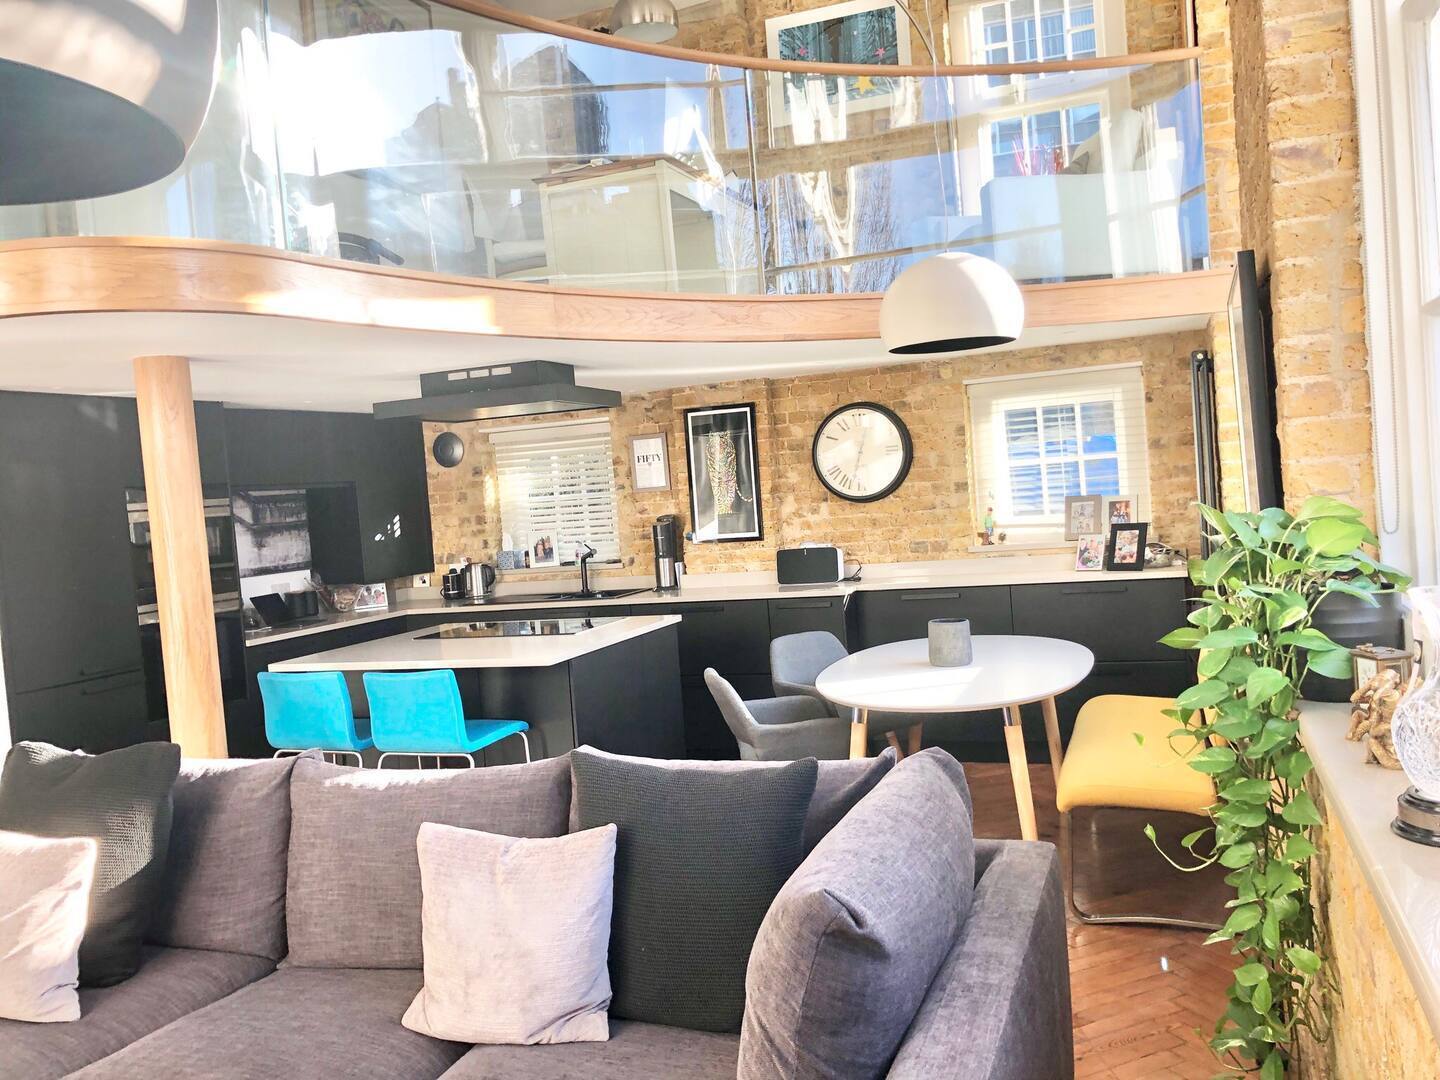 Top 10 Airbnb homes in London: from luxurious townhouses and stylish lofts to waterside retreats and vintage apartments